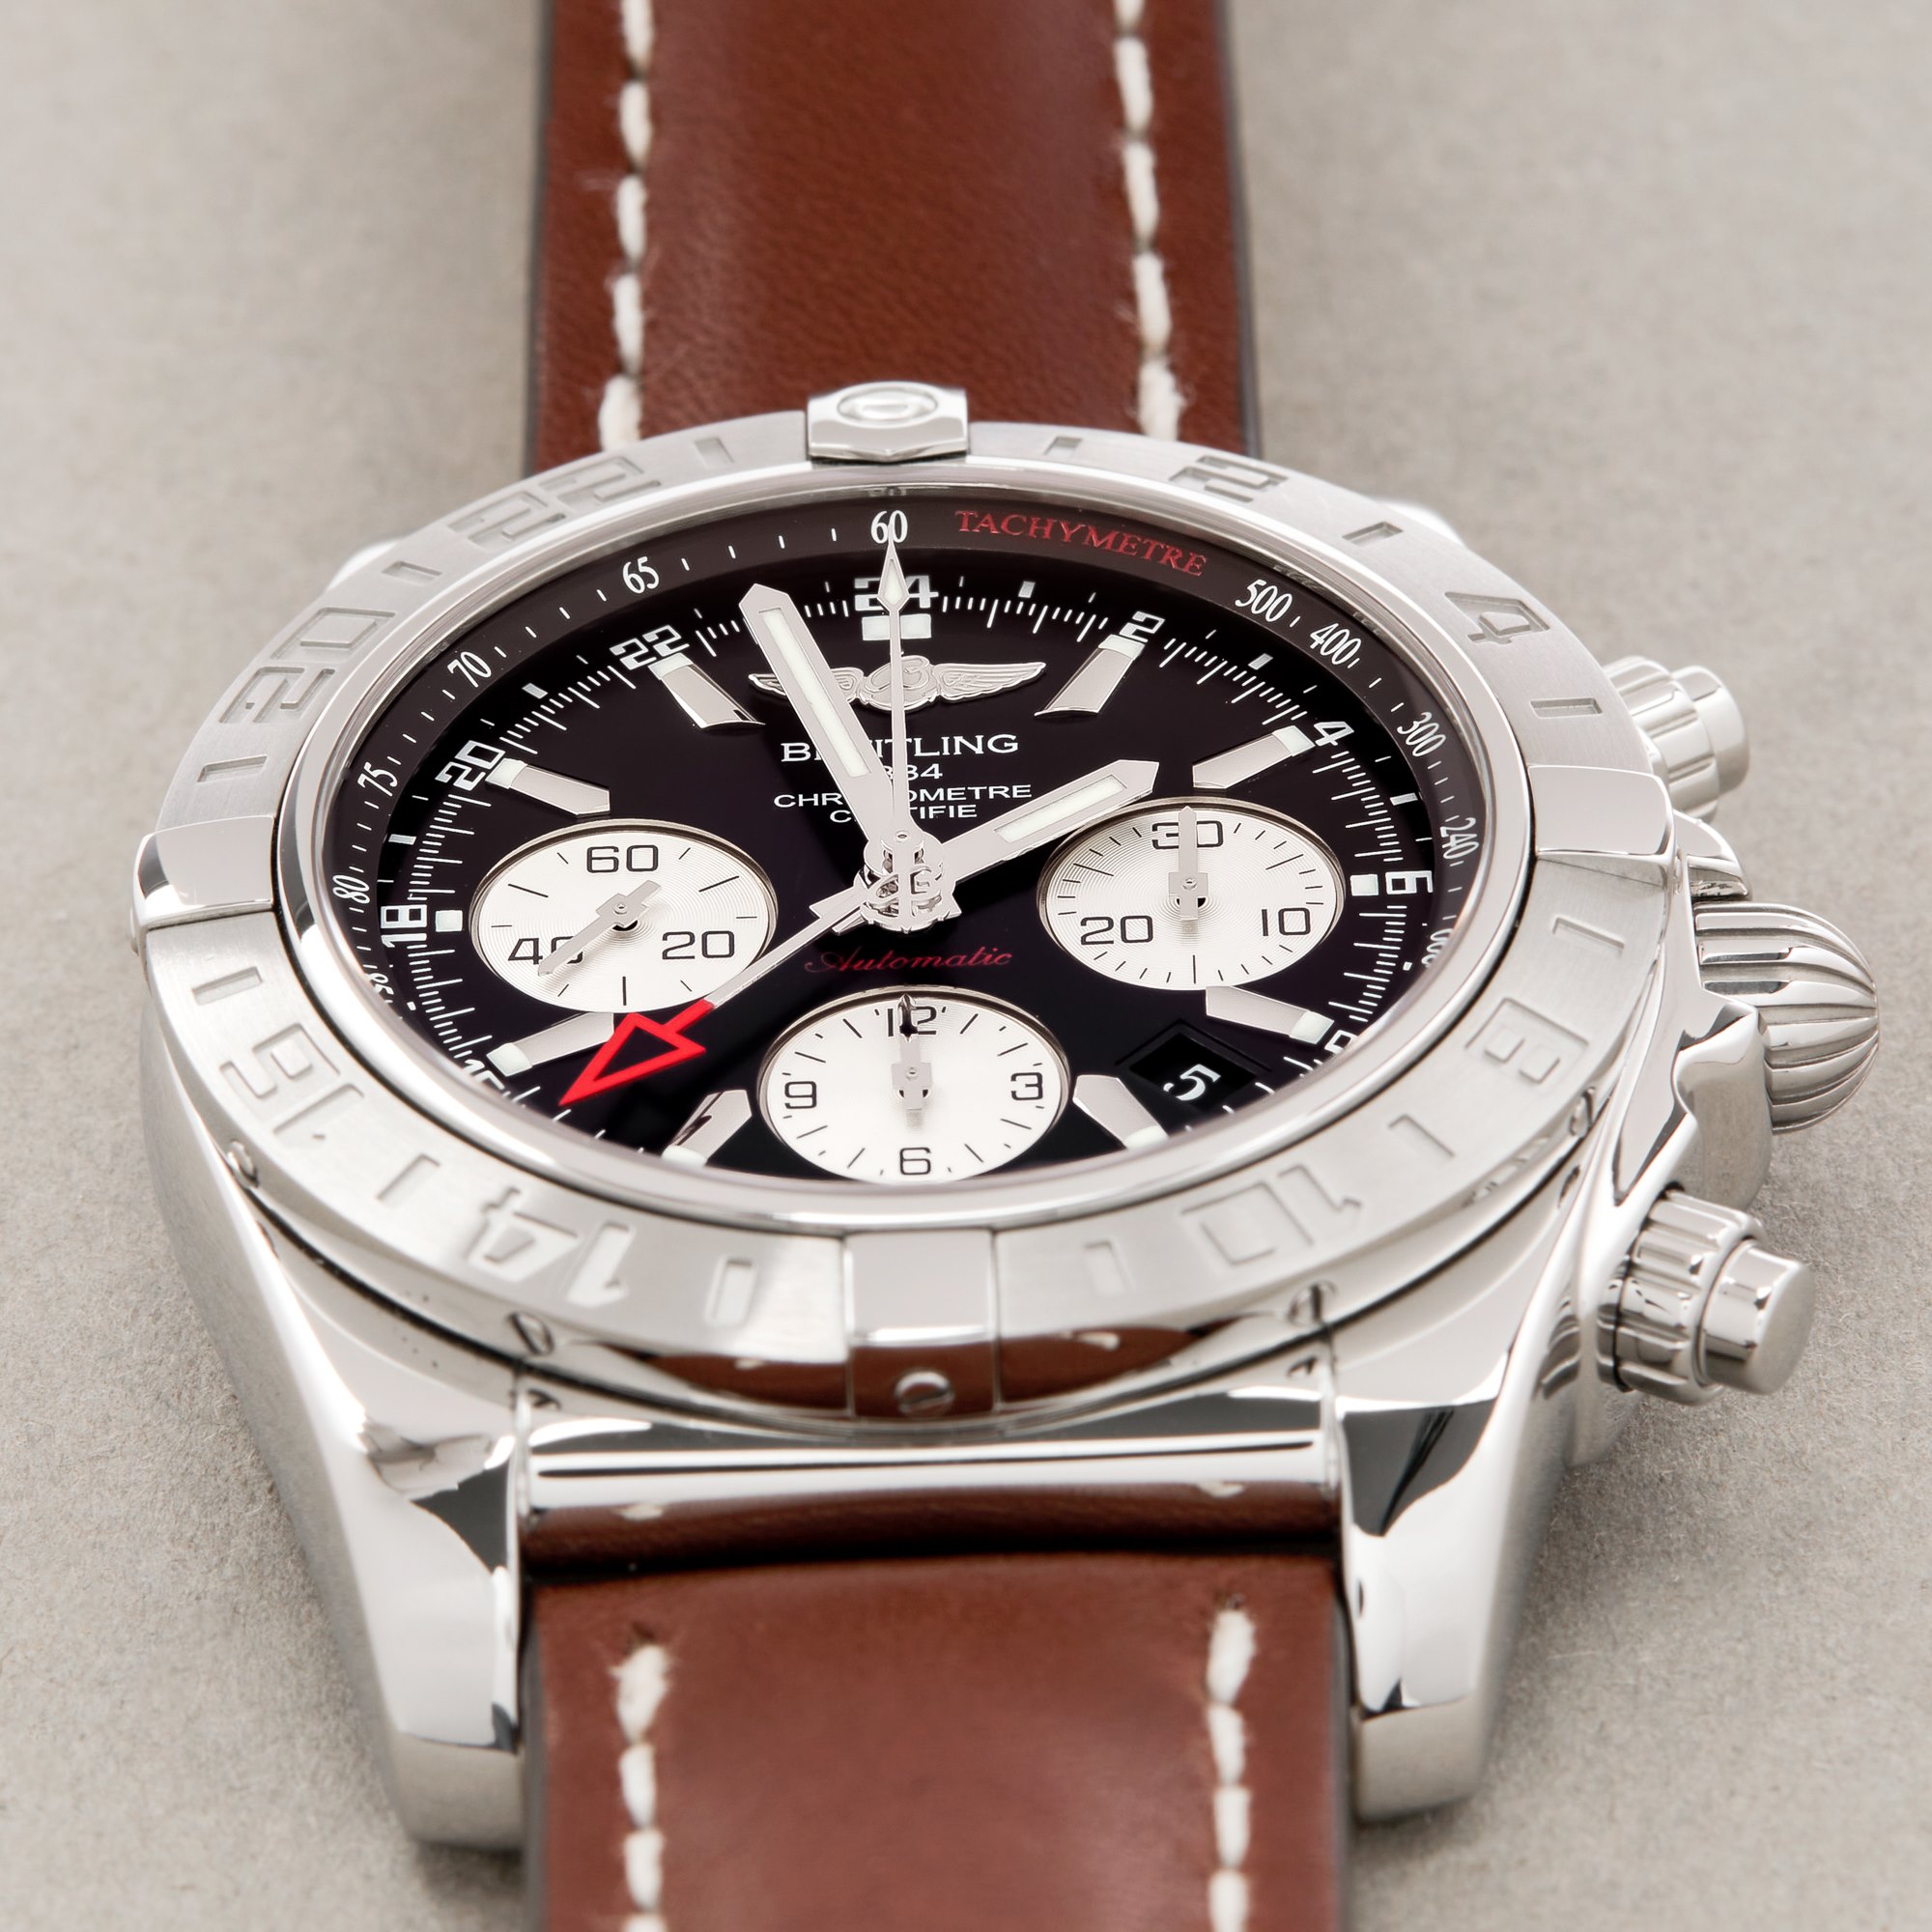 Breitling Chronomat 44 Chronograph Roestvrij Staal AB042011